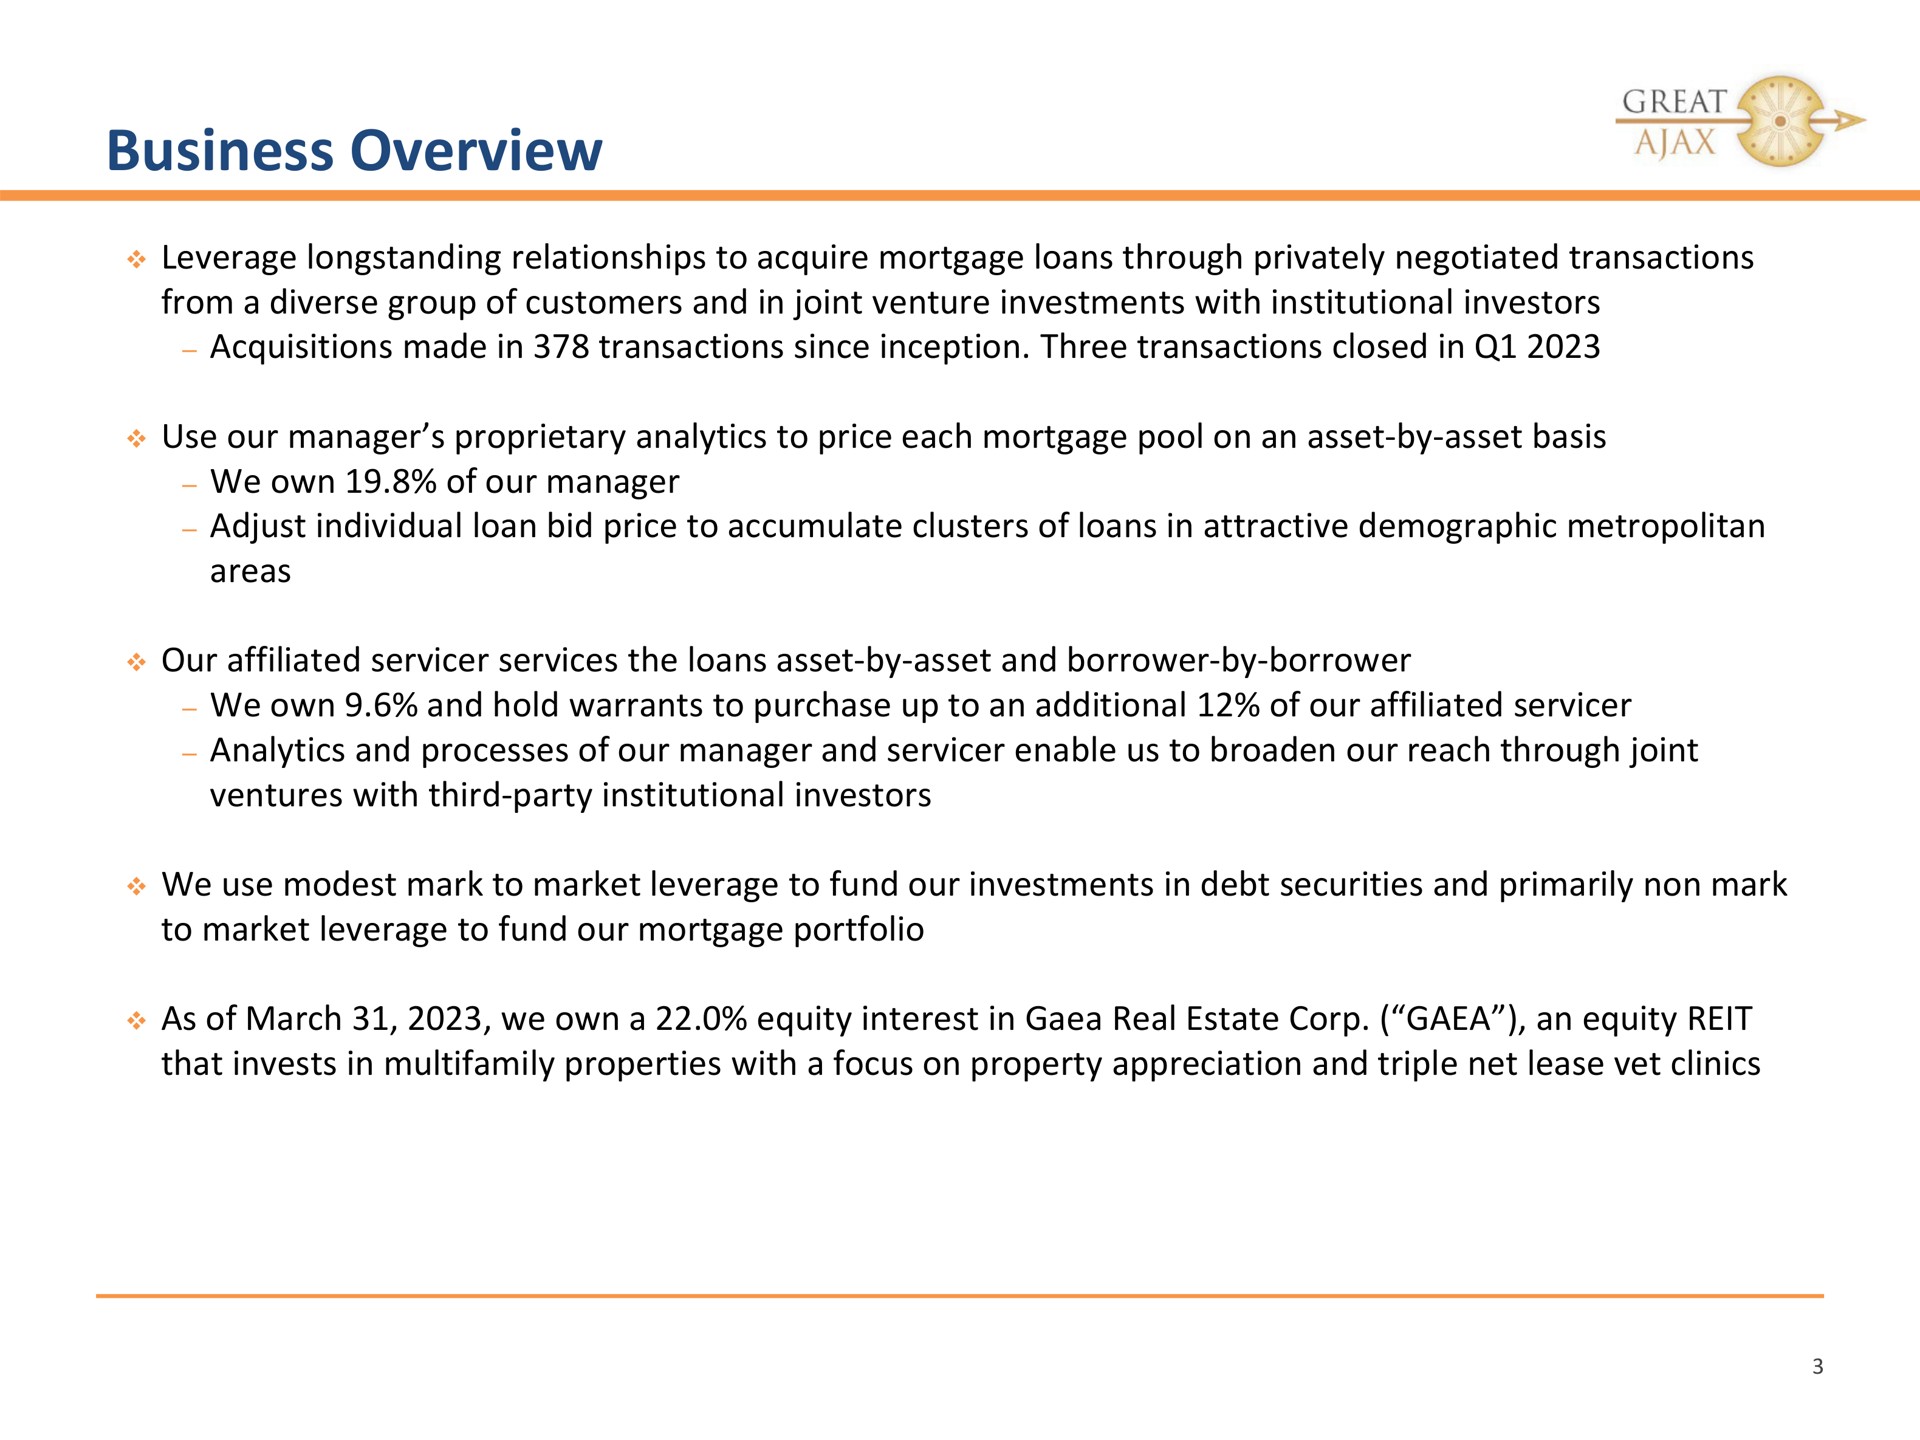 business overview leverage relationships to acquire mortgage loans through privately negotiated transactions from a diverse group of customers and in joint venture investments with institutional investors acquisitions made in transactions since inception three transactions closed in use our manager proprietary analytics to price each mortgage pool on an asset by asset basis we own of our manager adjust individual loan bid price to accumulate clusters of loans in attractive demographic metropolitan areas our affiliated services the loans asset by asset and borrower by borrower we own and hold warrants to purchase up to an additional of our affiliated analytics and processes of our manager and enable us to broaden our reach through joint ventures with third party institutional investors we use modest mark to market leverage to fund our investments in debt securities and primarily non mark to market leverage to fund our mortgage portfolio as of march we own a equity interest in real estate corp an equity reit that invests in properties with a focus on property appreciation and triple net lease vet clinics | Great Ajax